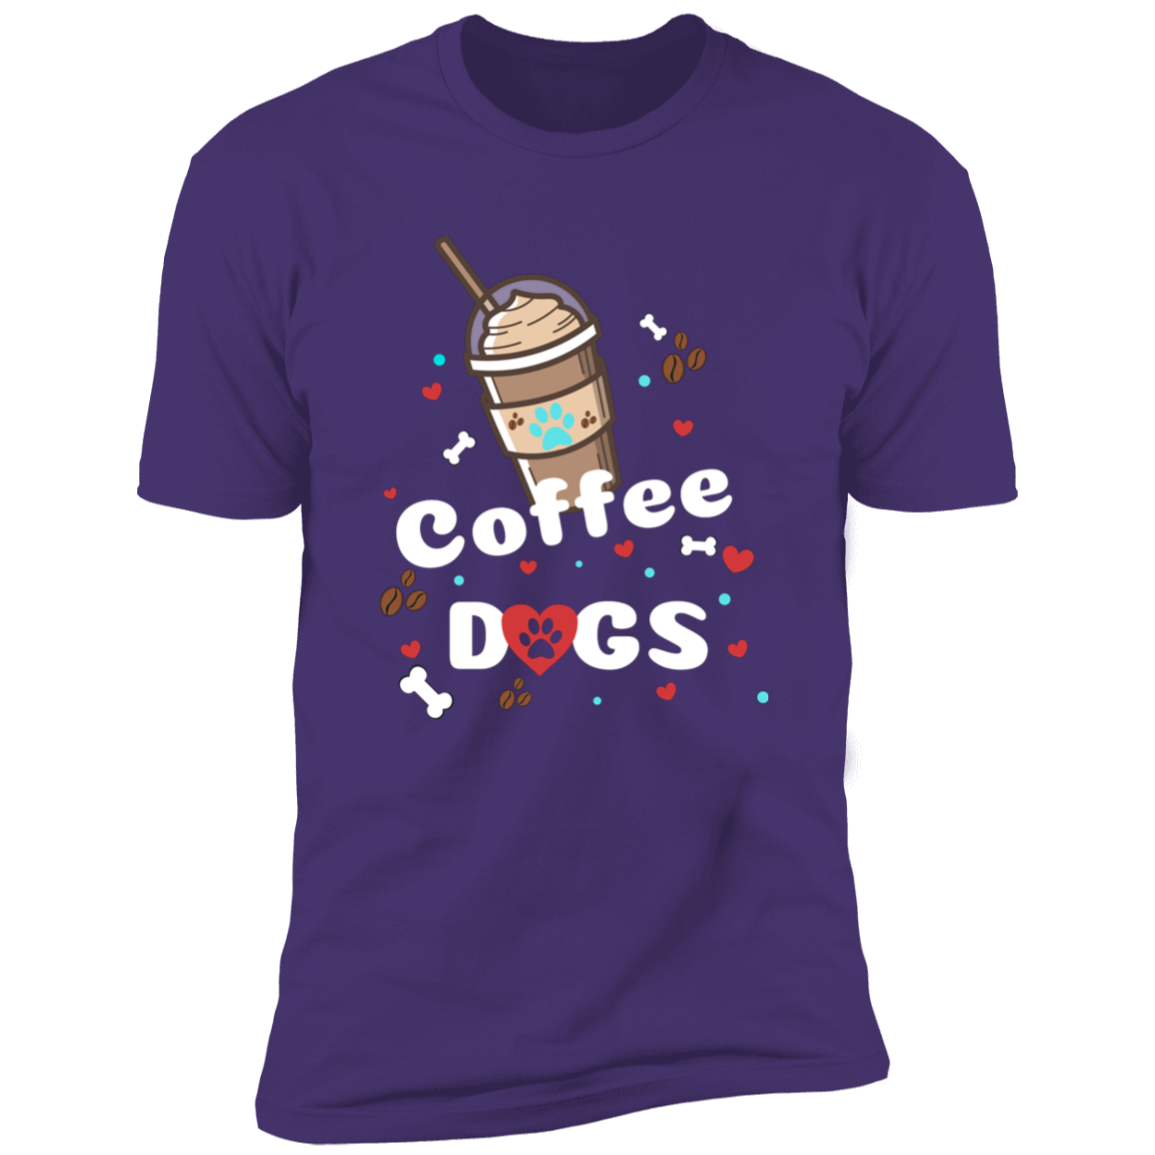 Blended Coffee Dogs T-shirt, Dog Shirt for humans, in purple rush